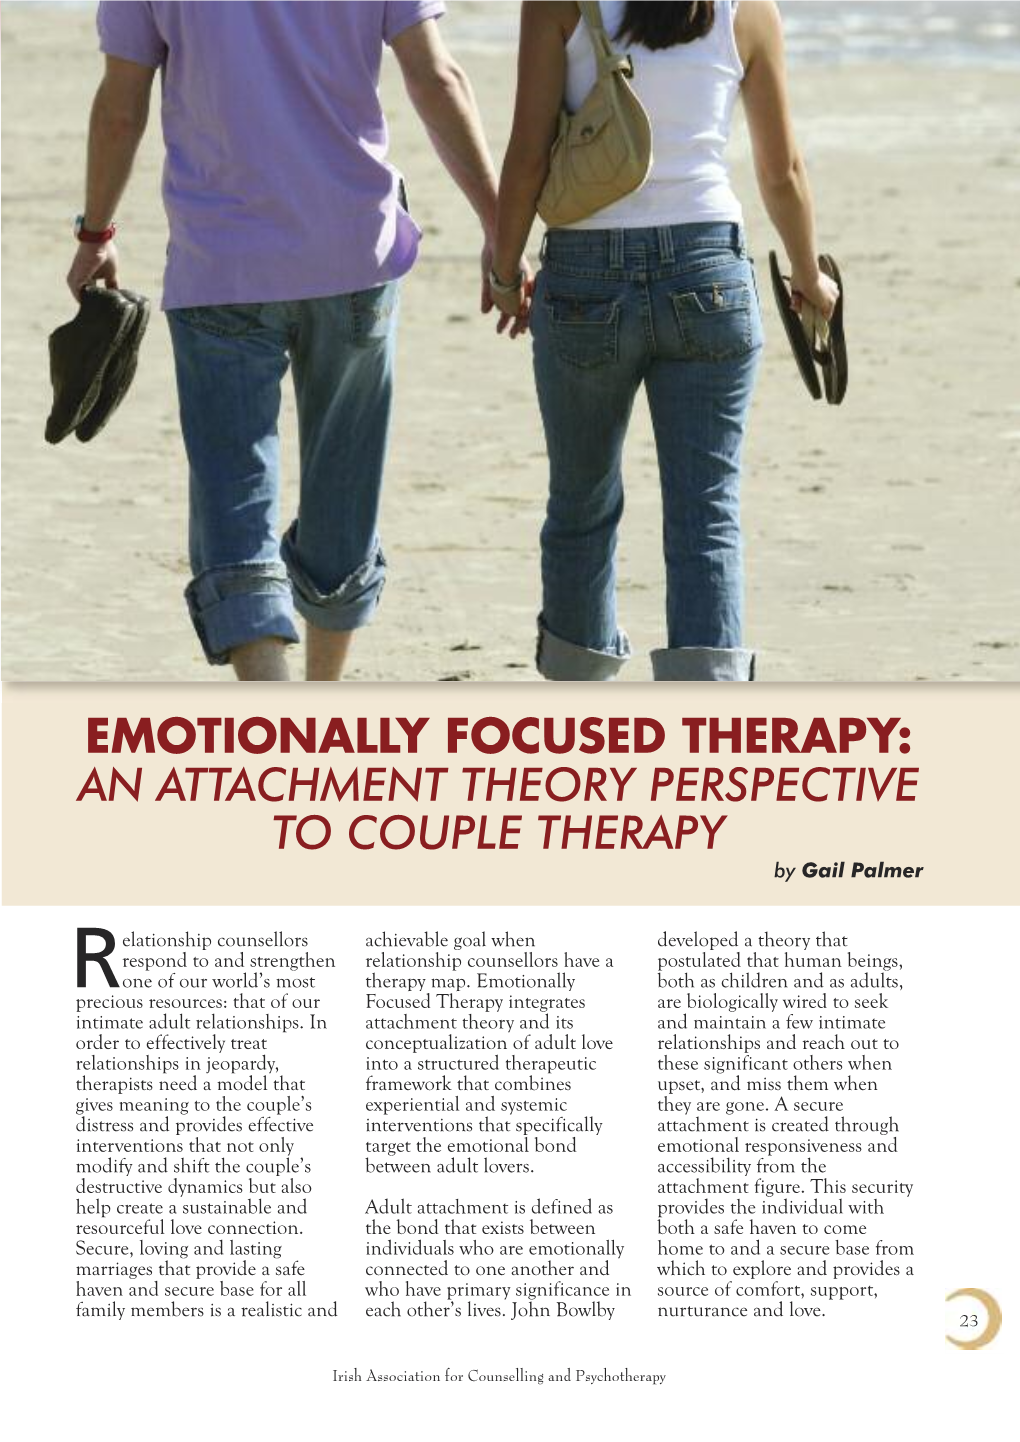 EMOTIONALLY FOCUSED THERAPY: an ATTACHMENT THEORY PERSPECTIVE to COUPLE THERAPY by Gail Palmer